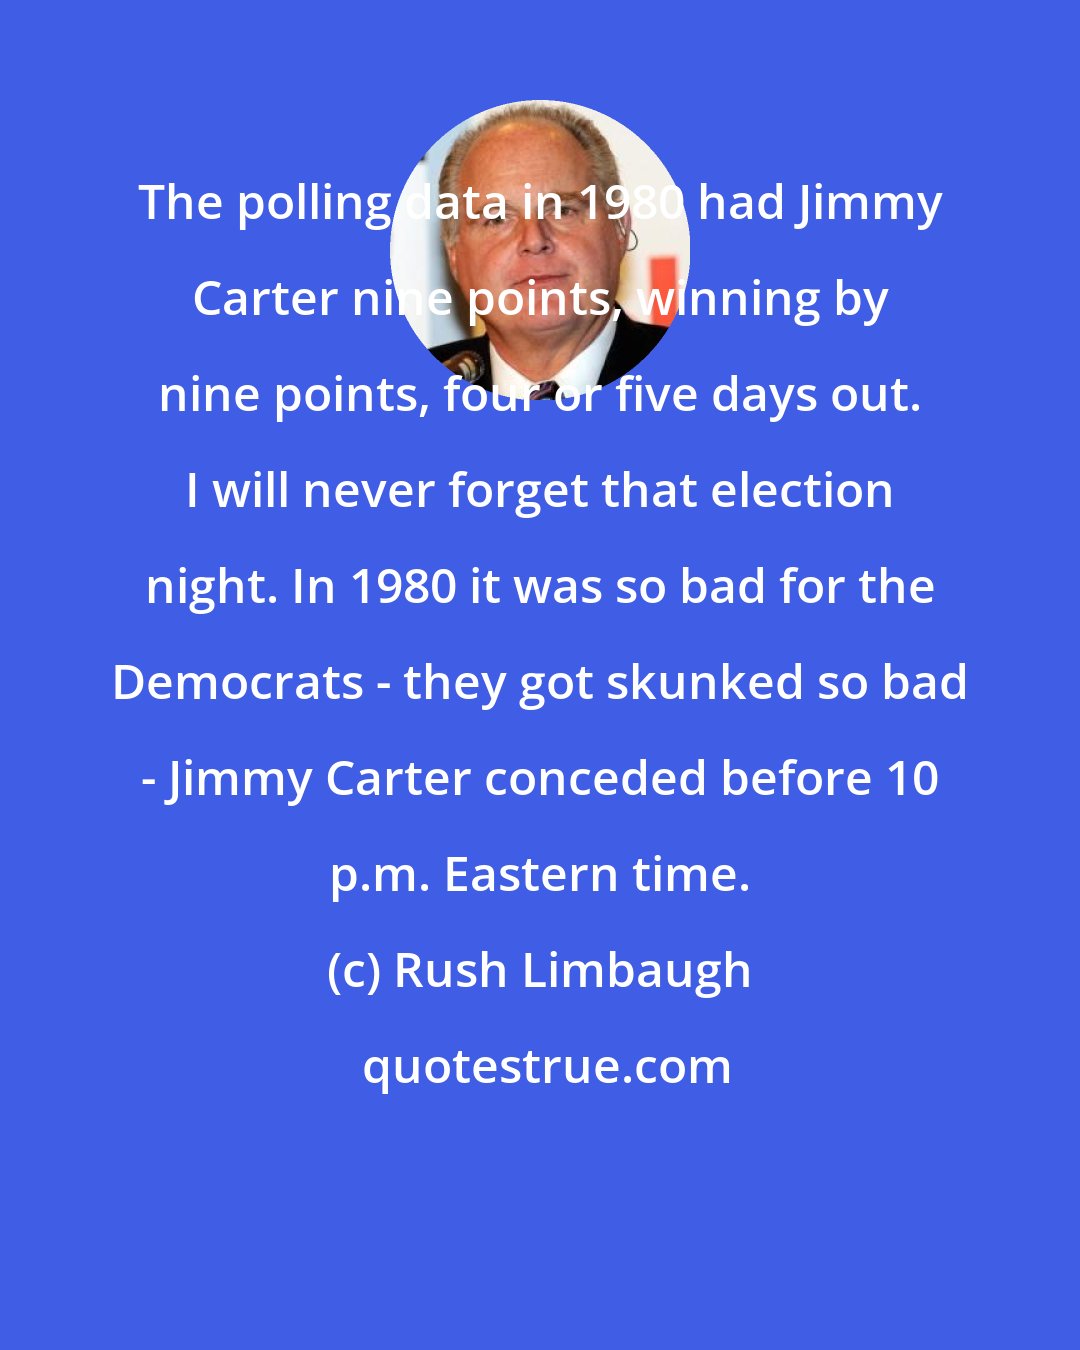 Rush Limbaugh: The polling data in 1980 had Jimmy Carter nine points, winning by nine points, four or five days out. I will never forget that election night. In 1980 it was so bad for the Democrats - they got skunked so bad - Jimmy Carter conceded before 10 p.m. Eastern time.